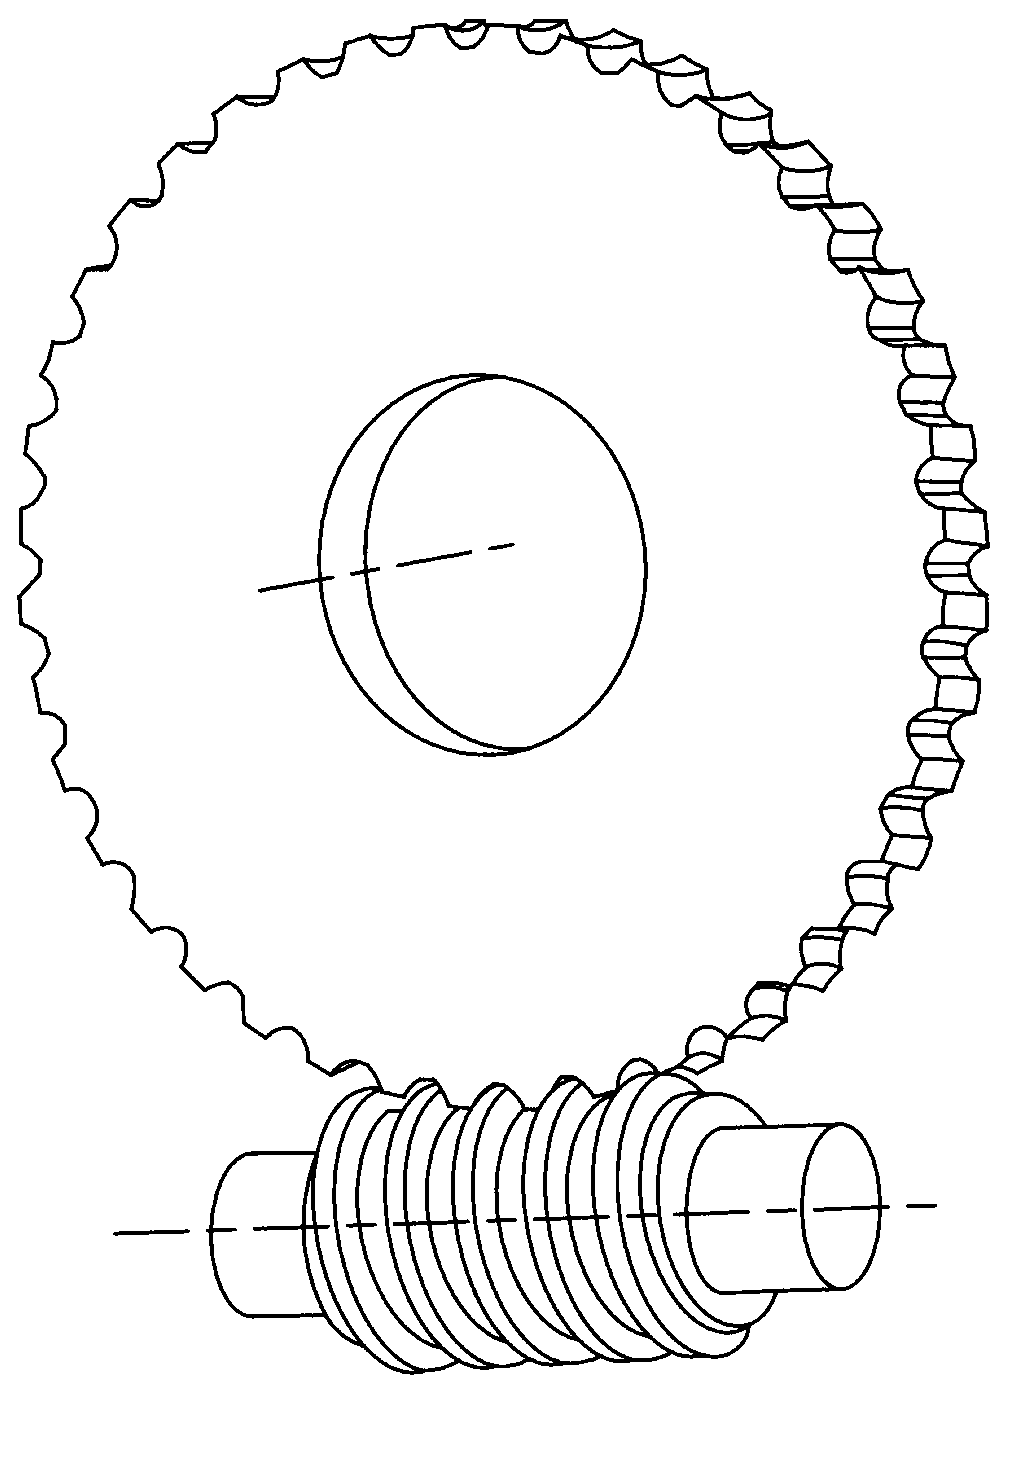 Worm and worm gear on basis of conjugate curves, and mesh pair with worm and worm gear